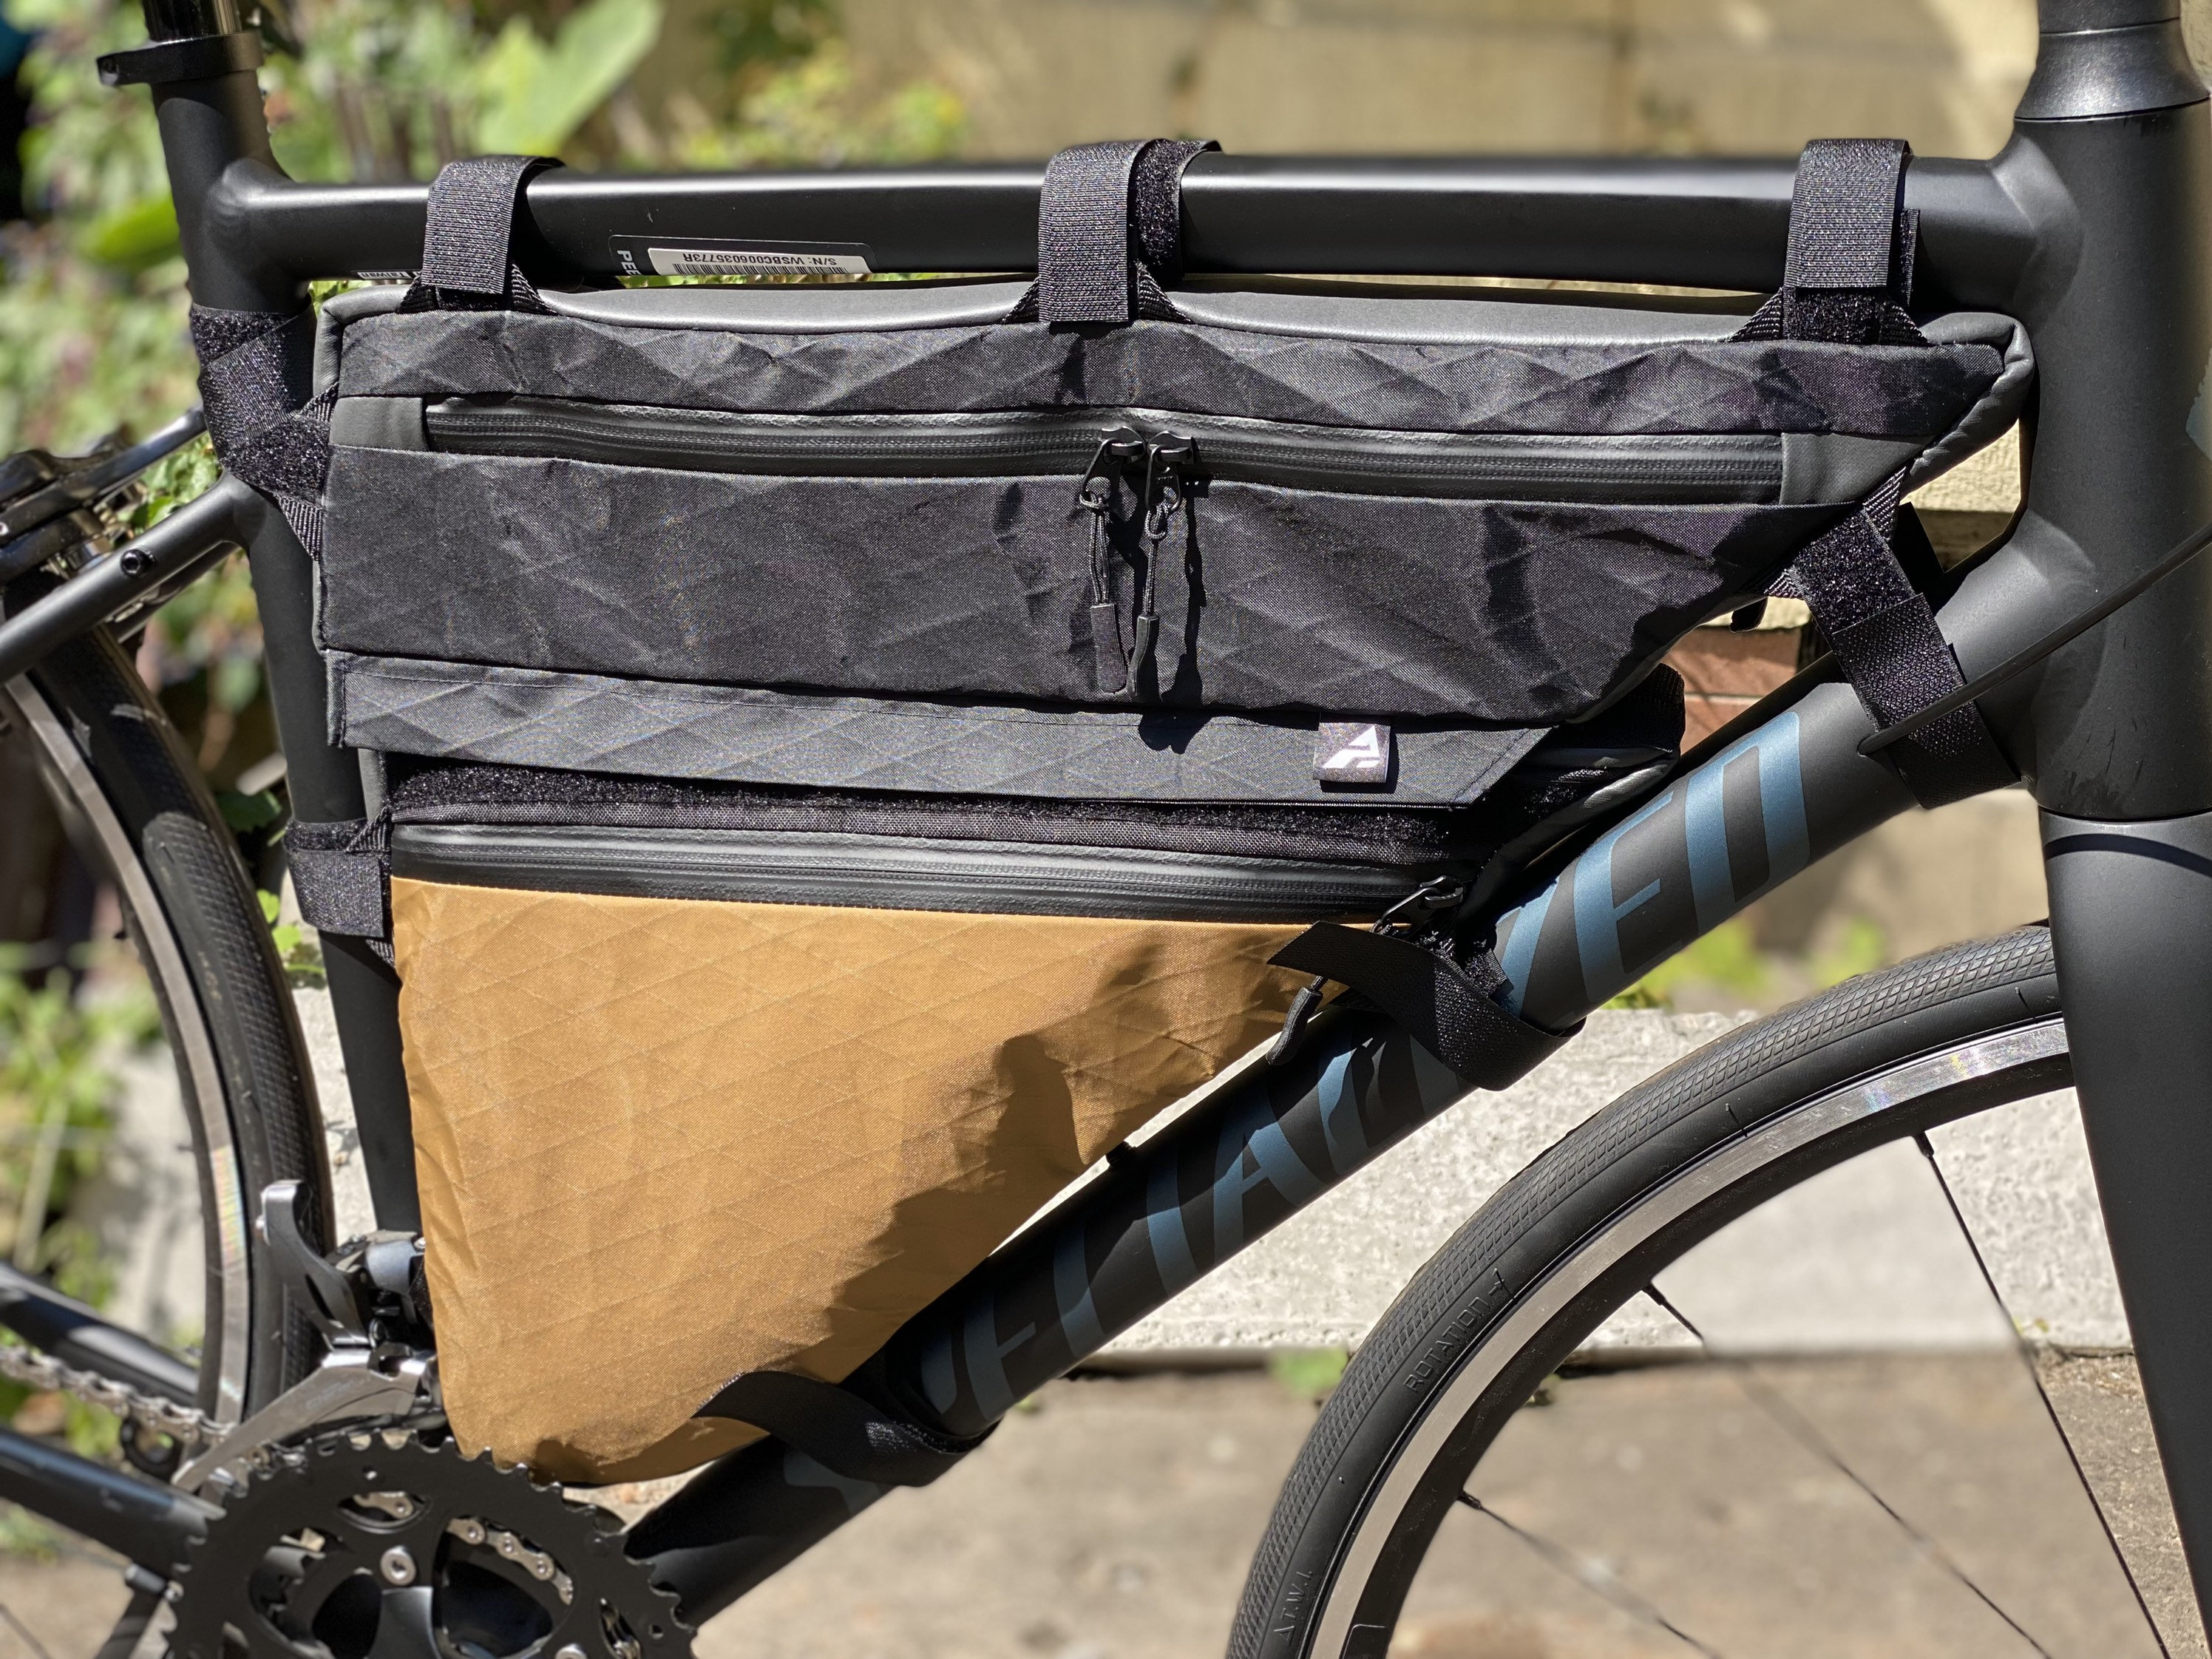 Custom Frame Bag With Two Parts pic